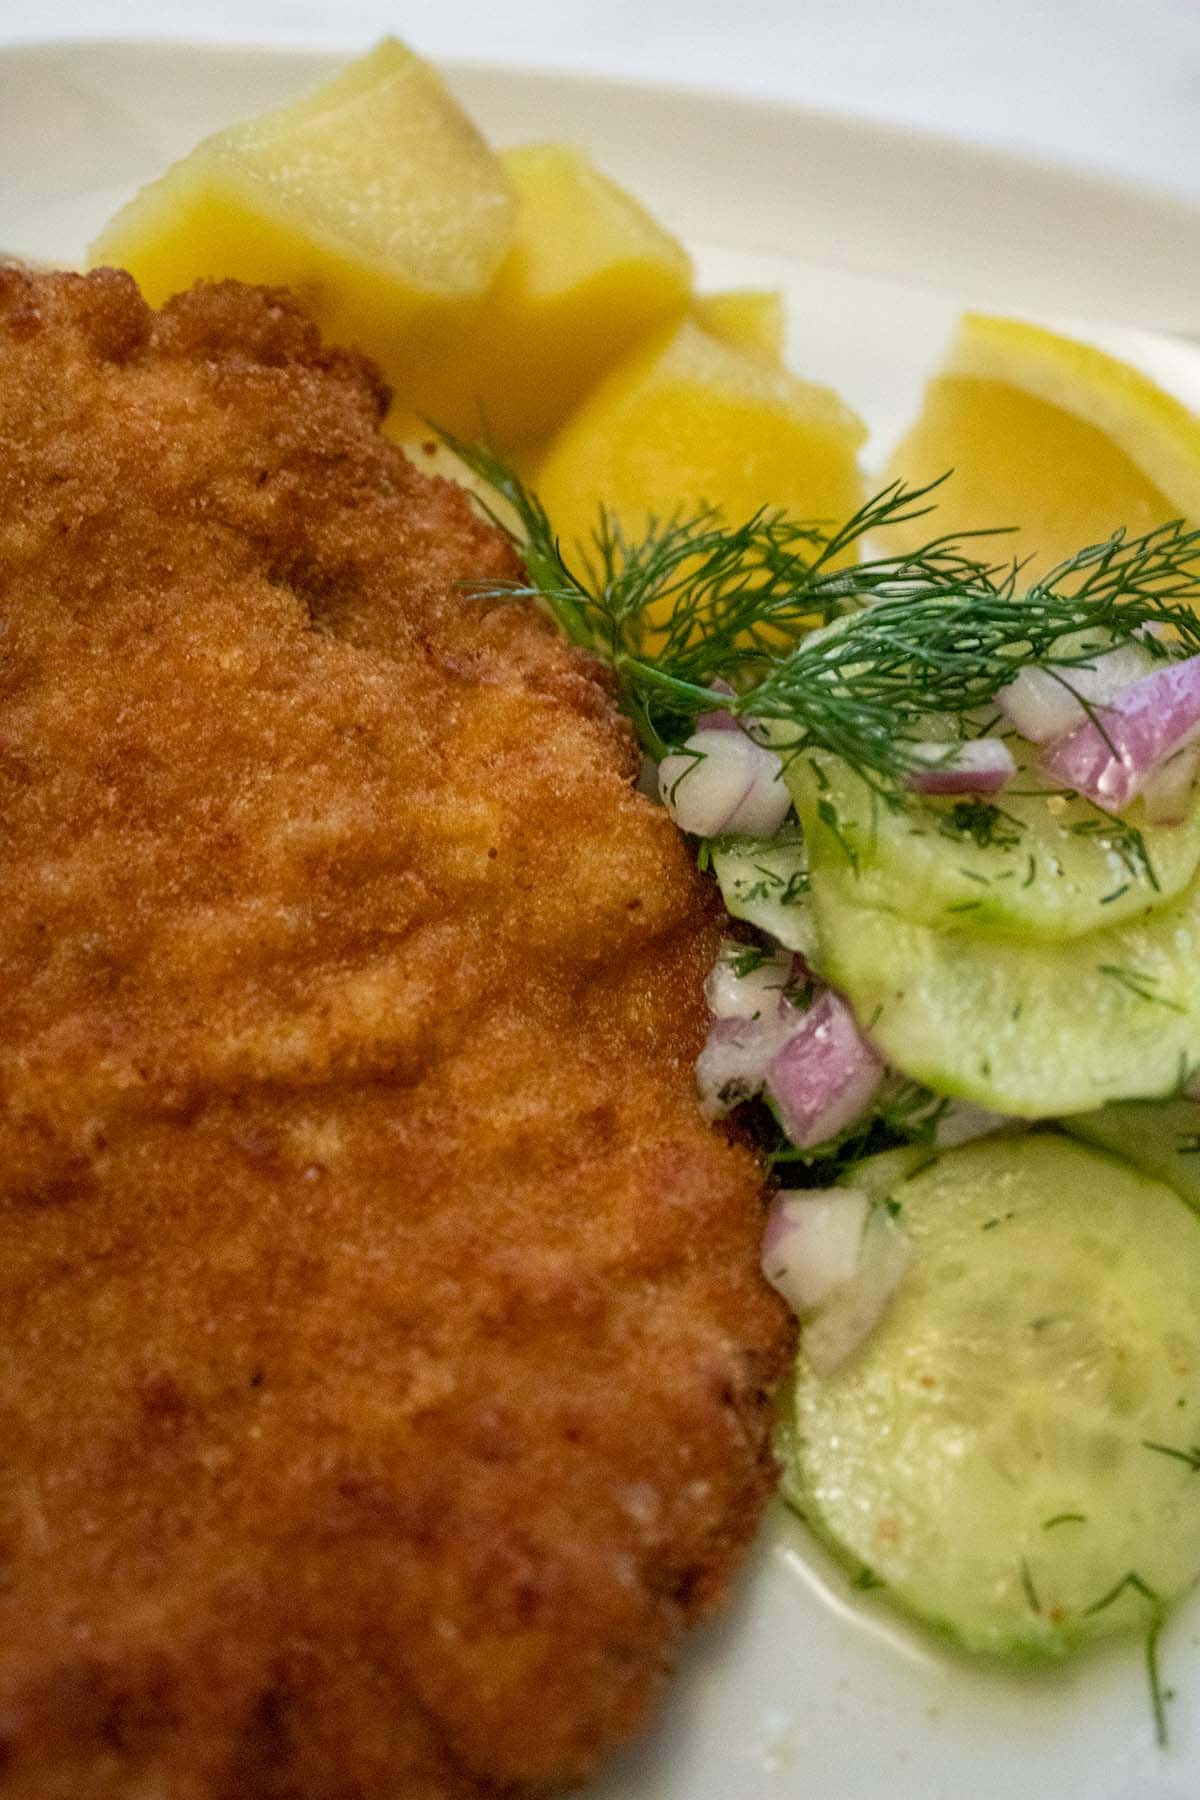 Gold brown schnitzel with cucumber salad, potatoes and a slice of lemon on a plate